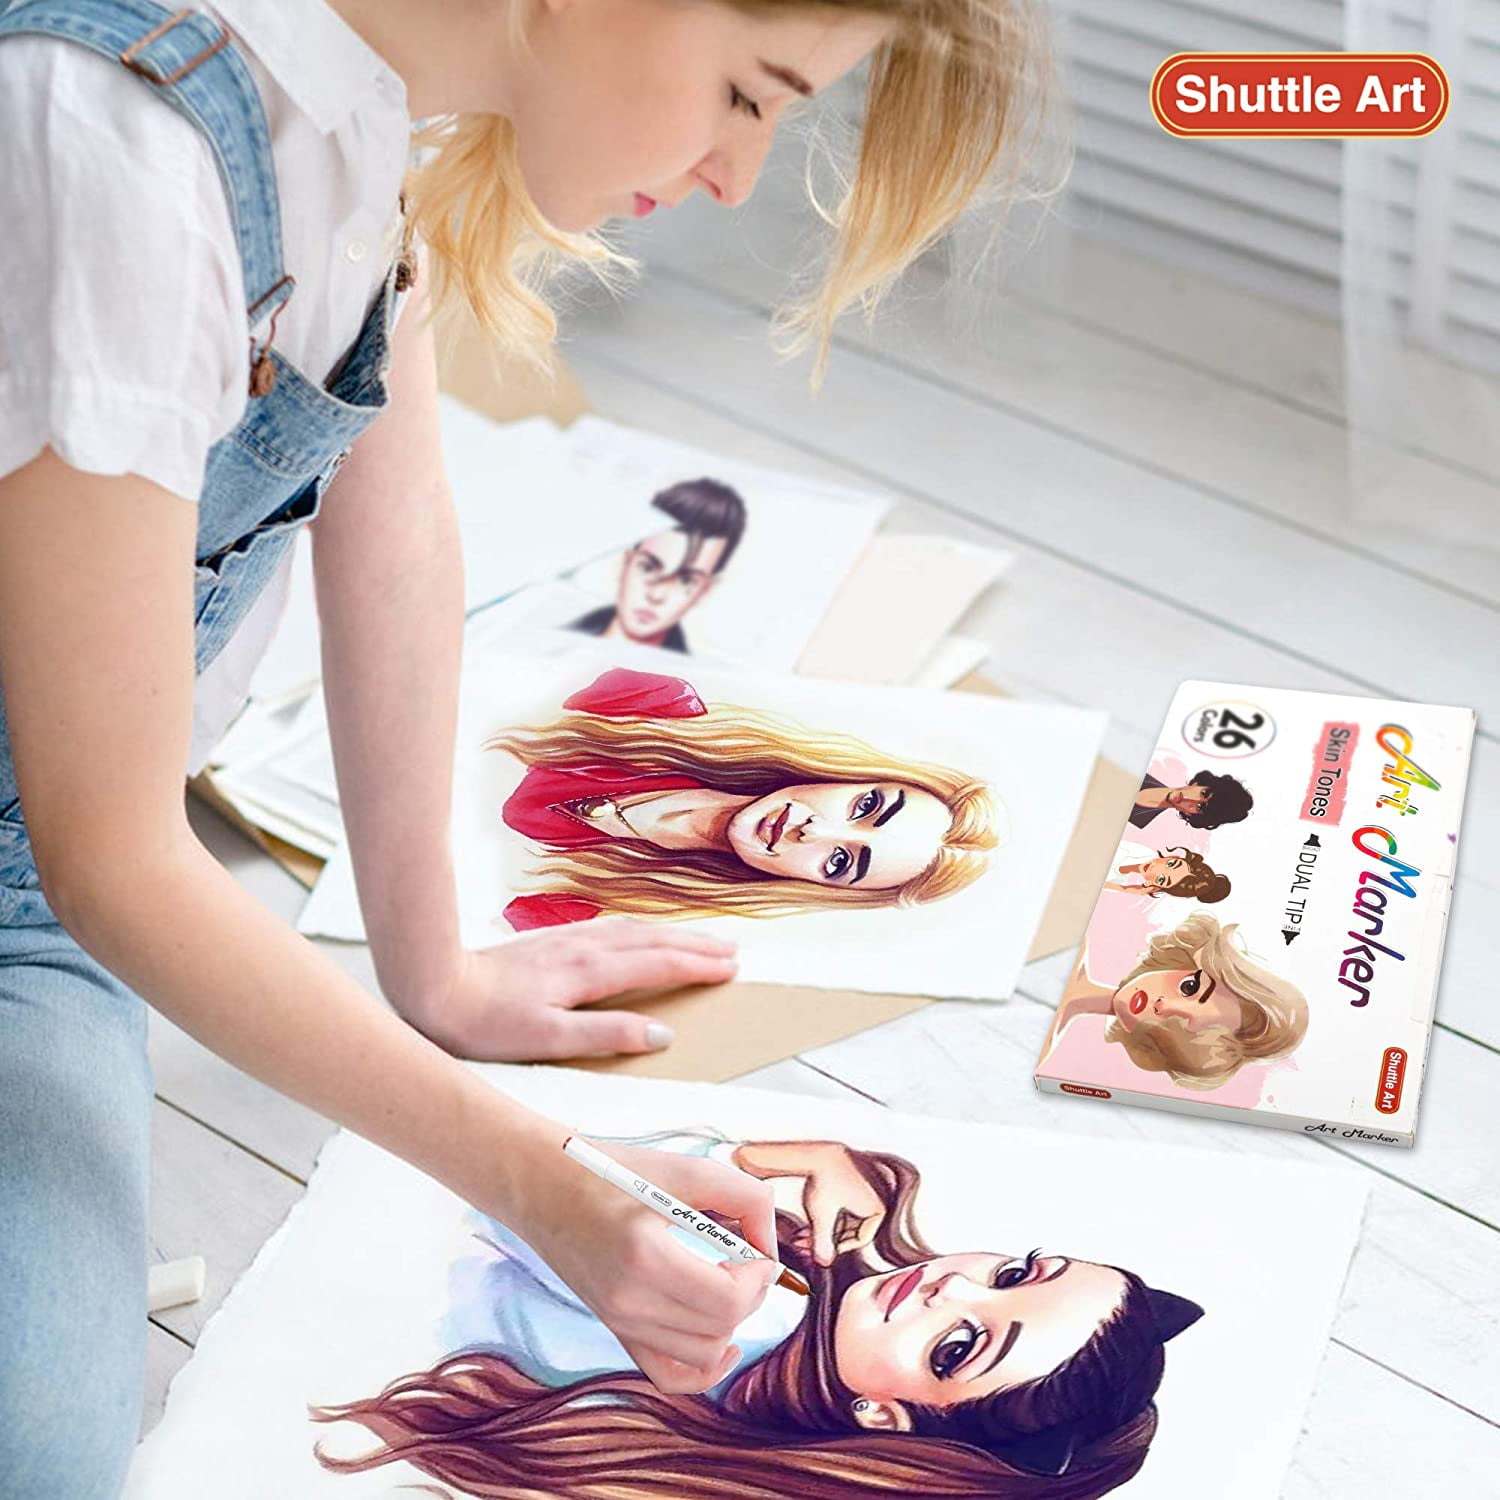 Shuttle Art 26 Colors Skin Tone&Hair Art Markers, Dual Tip Alcohol Based Flesh-Color Marker Pen Set Contains 1 Blender Perfect for Kids & Adults